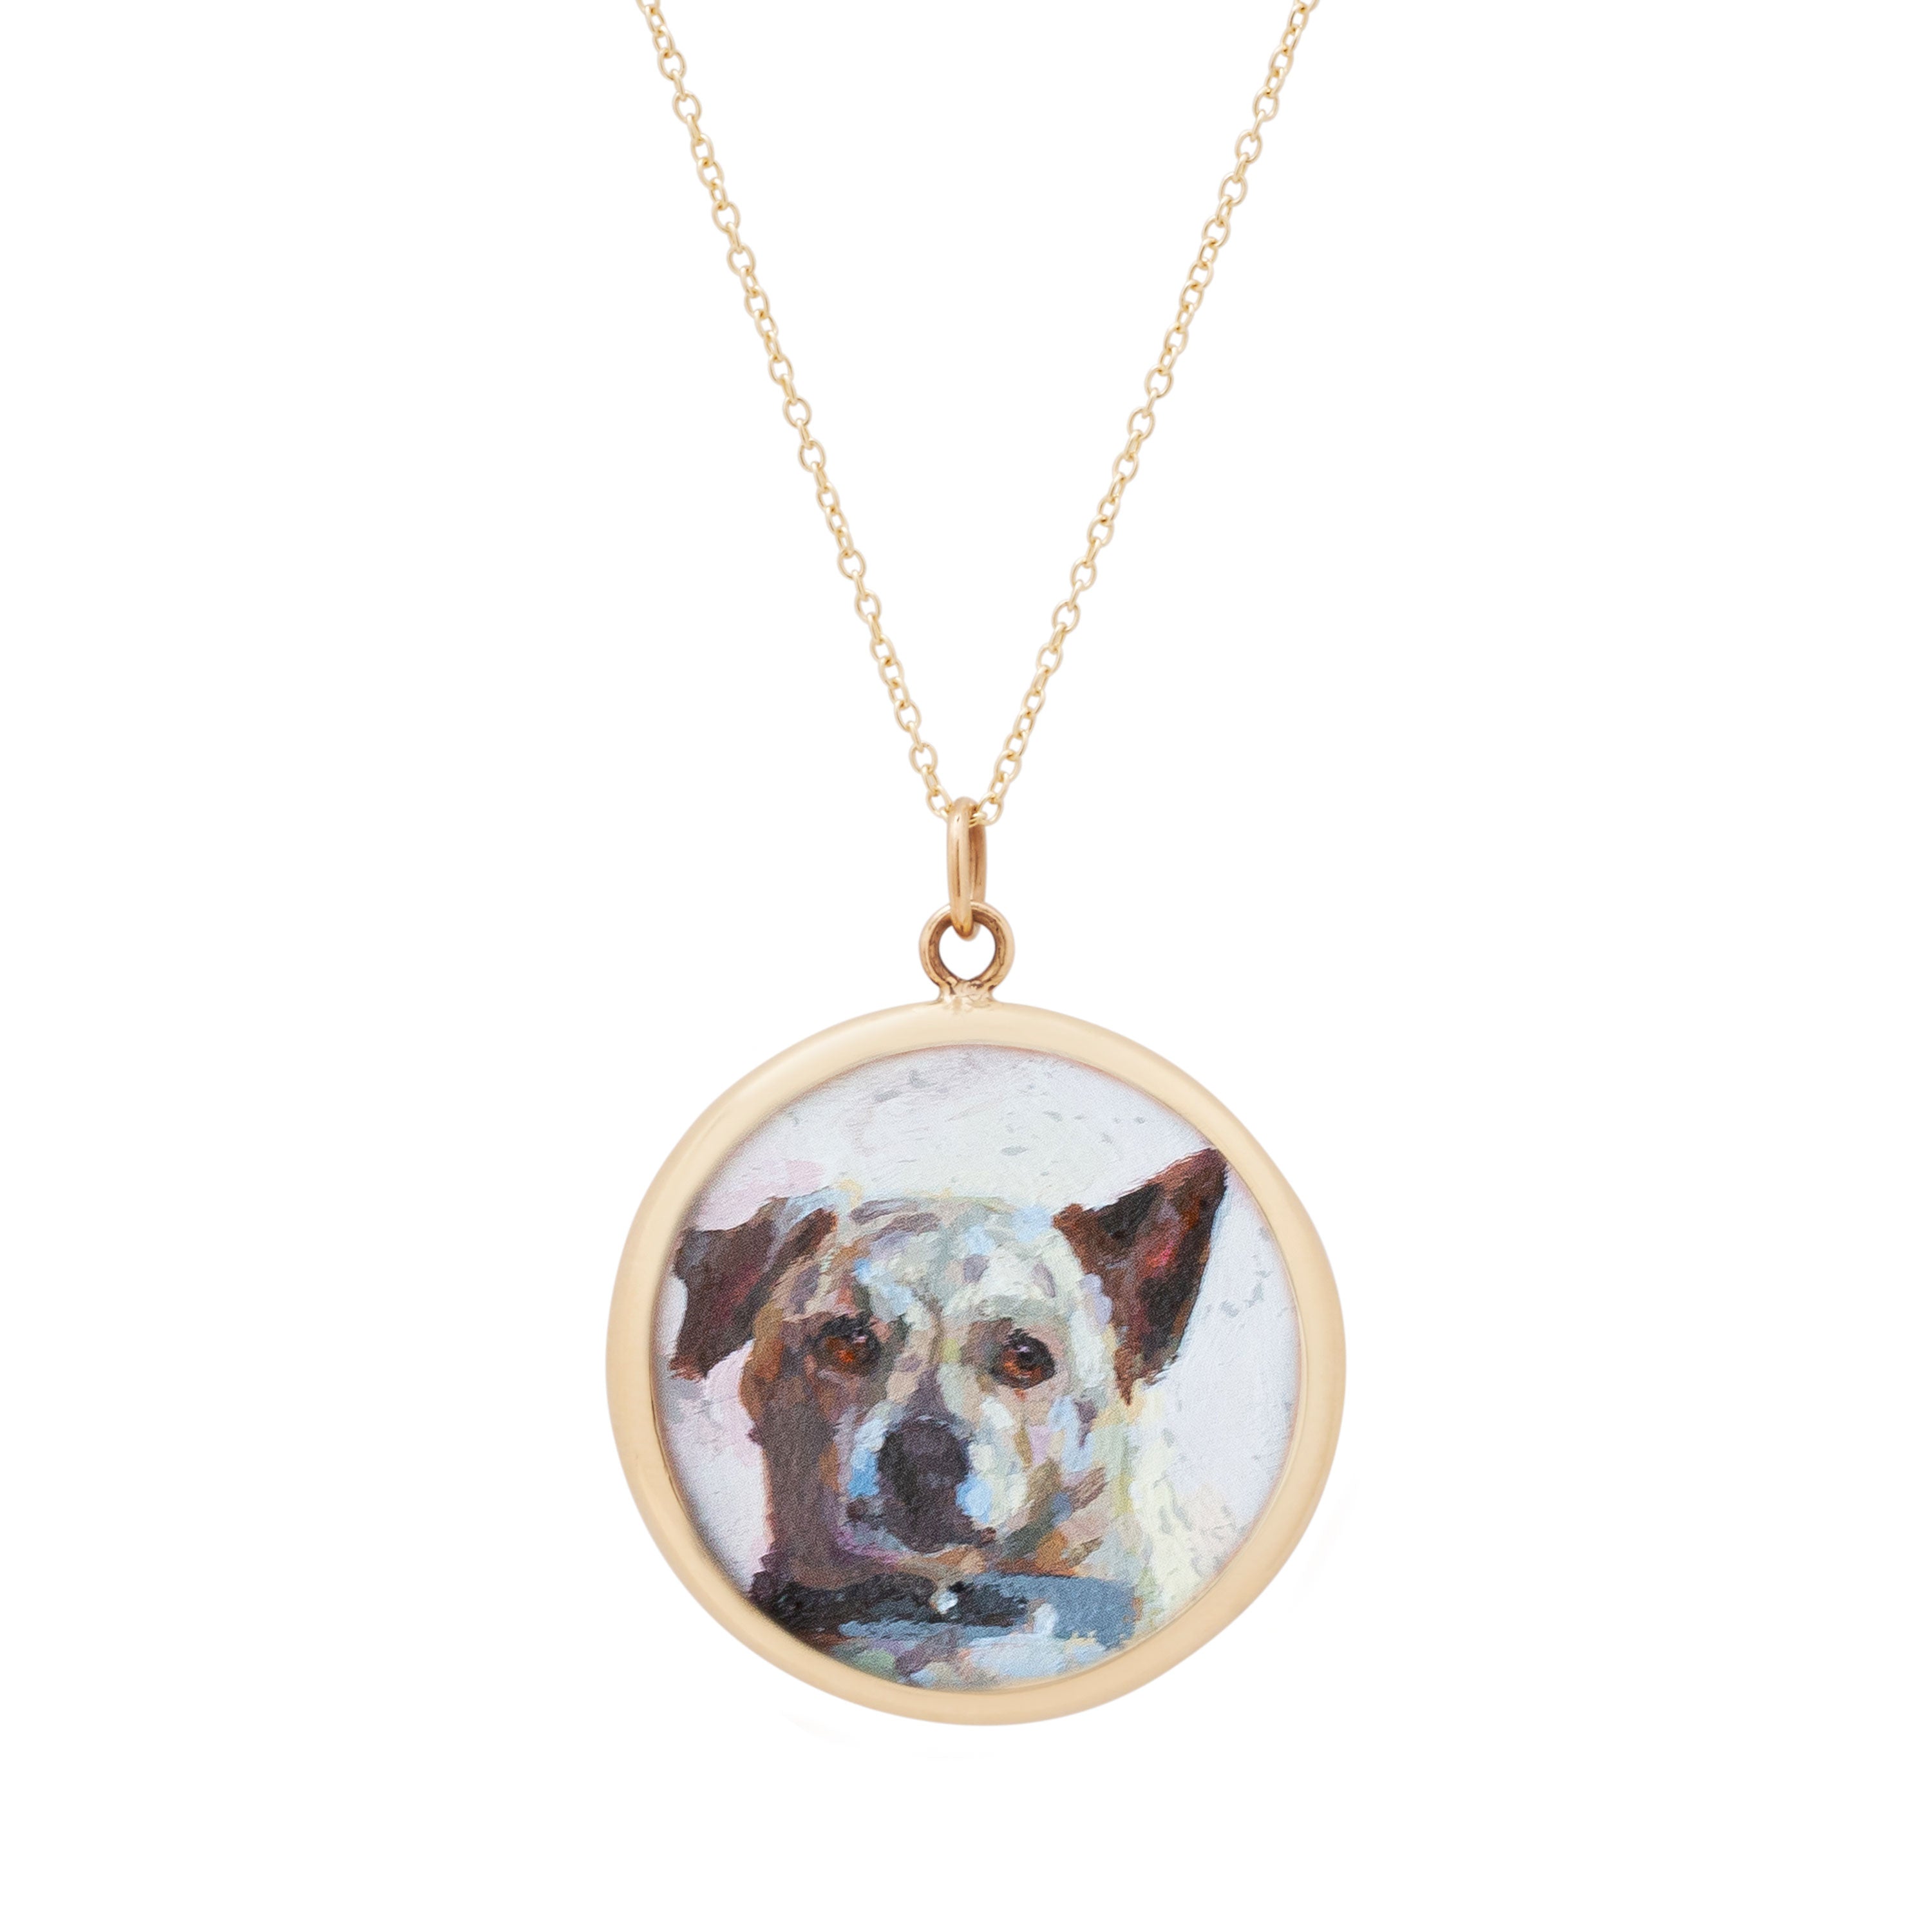 Customized Engraved Pet Portrait Necklace Memorial Jewelry Sliver / Both Sides Photo